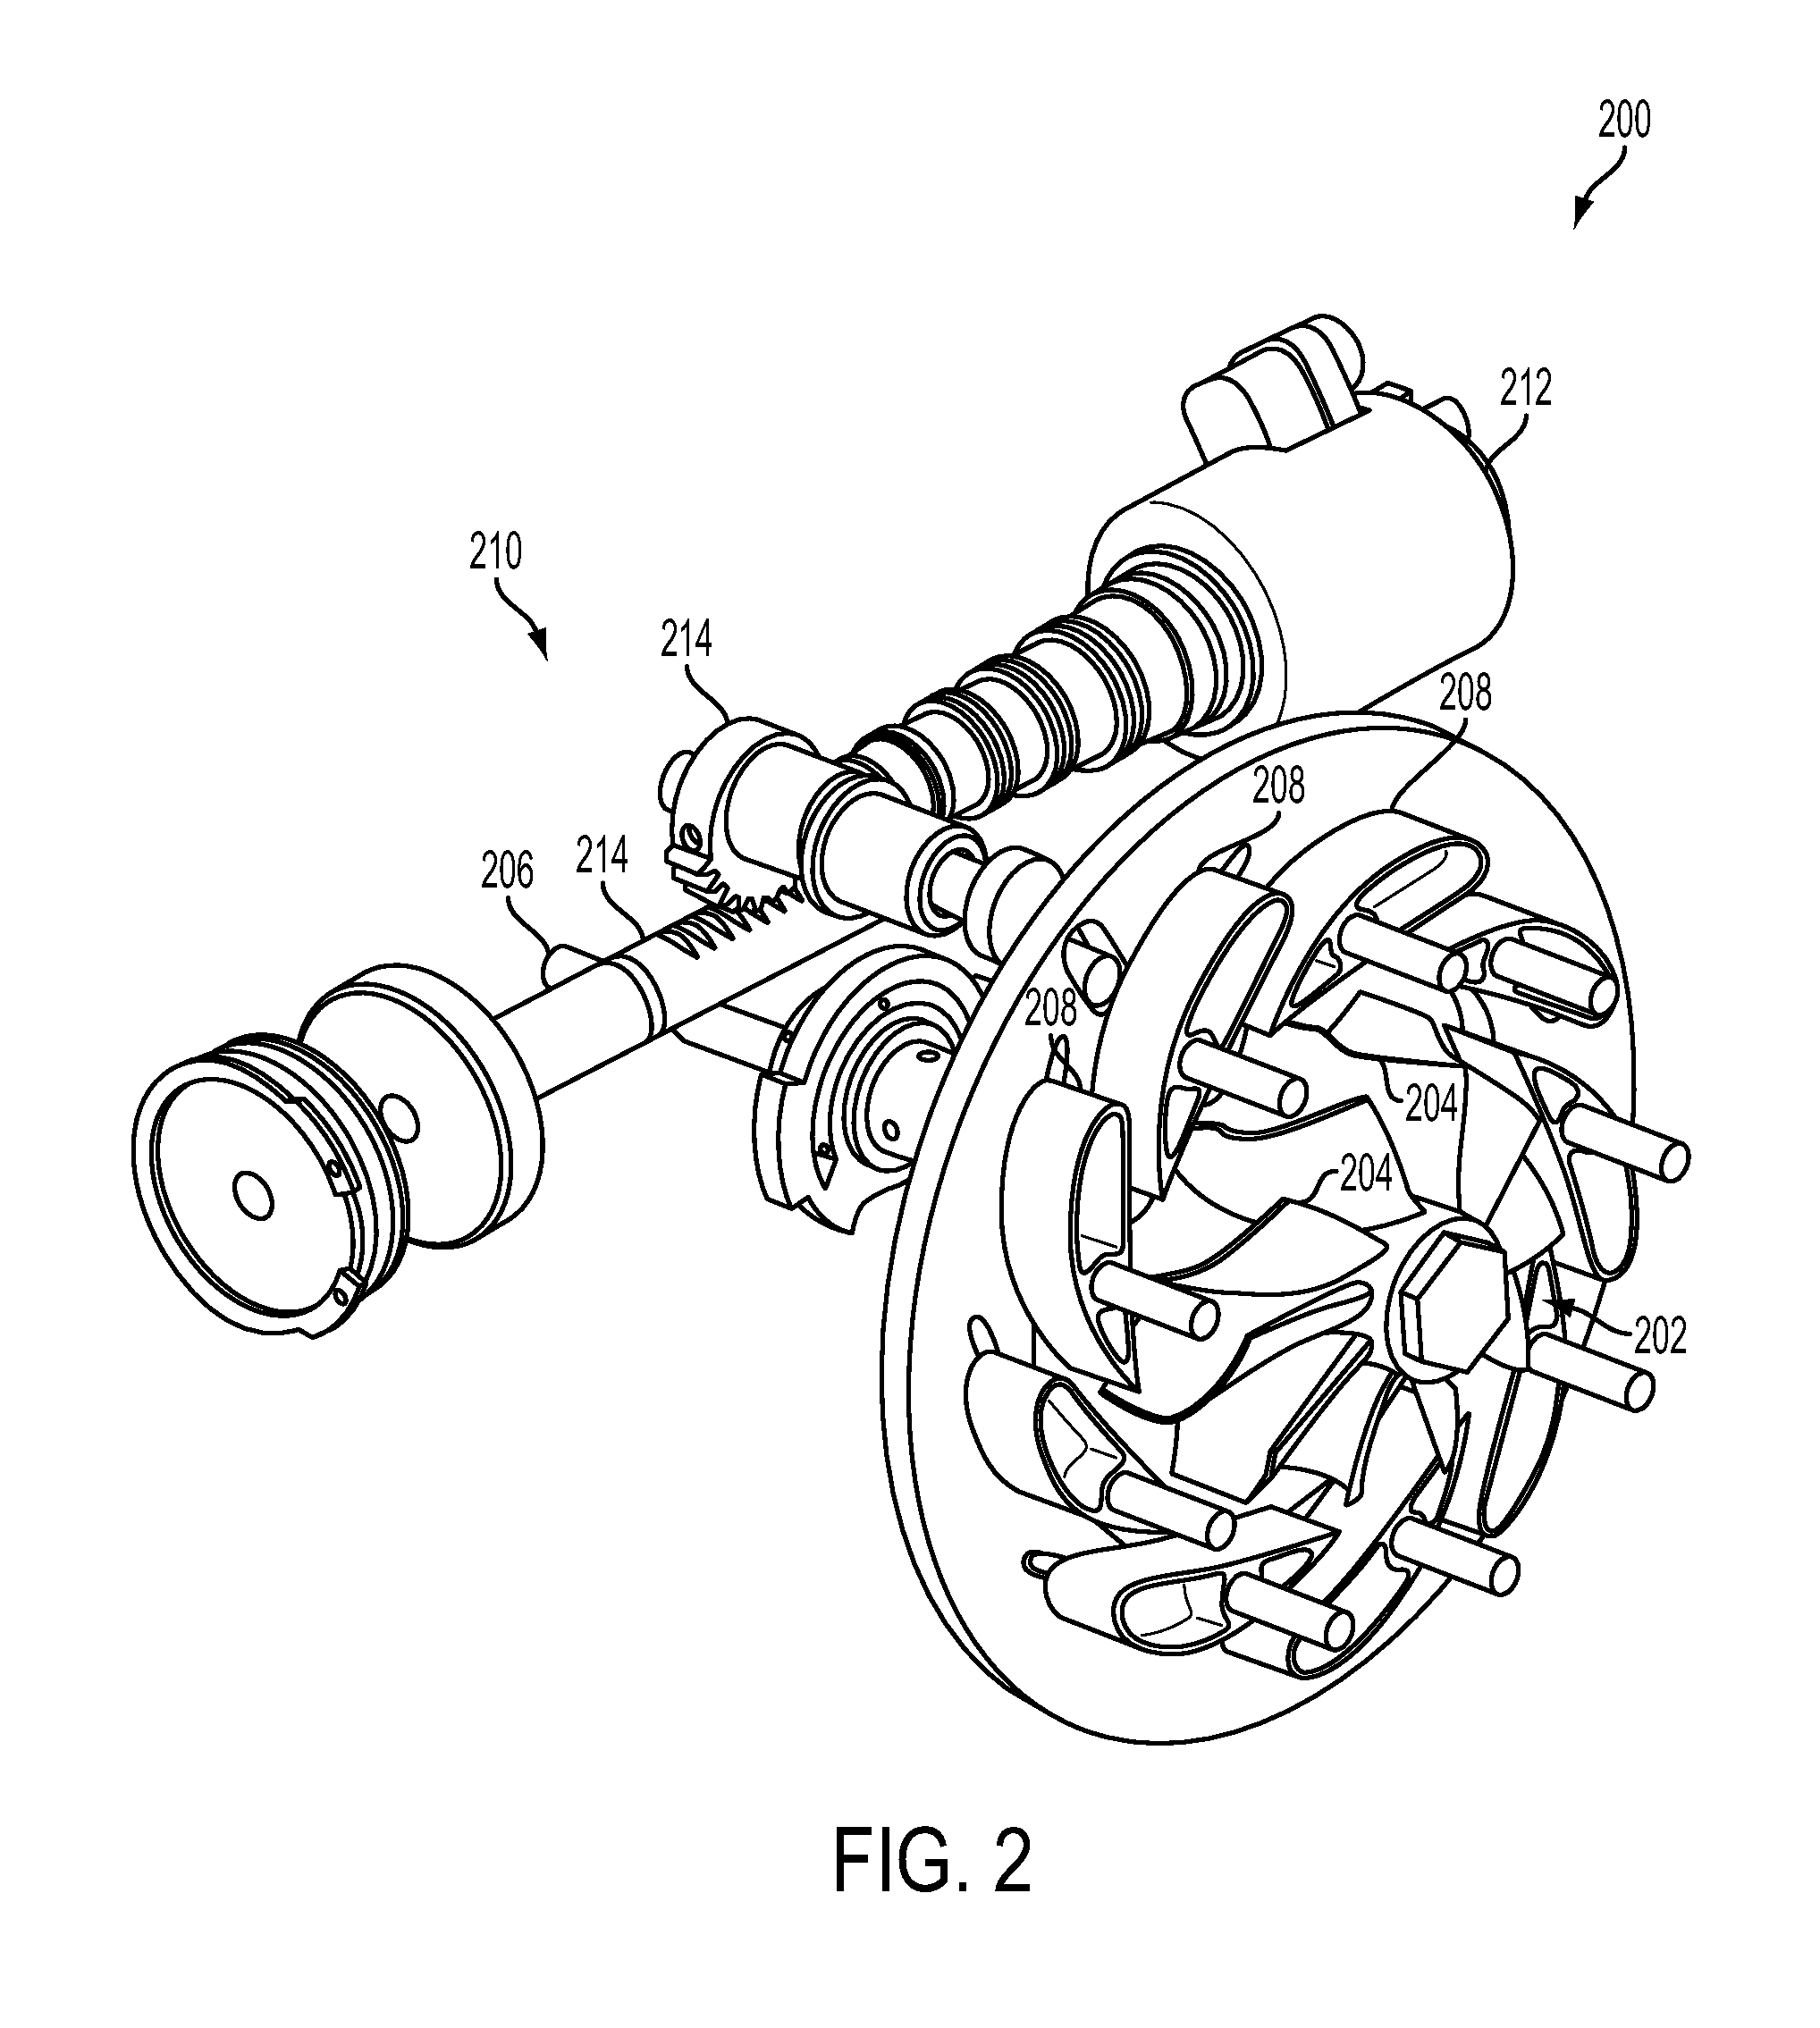 System and method for determining turbine degradation and mitigating turbine degradation in a variable geometry turbocharger